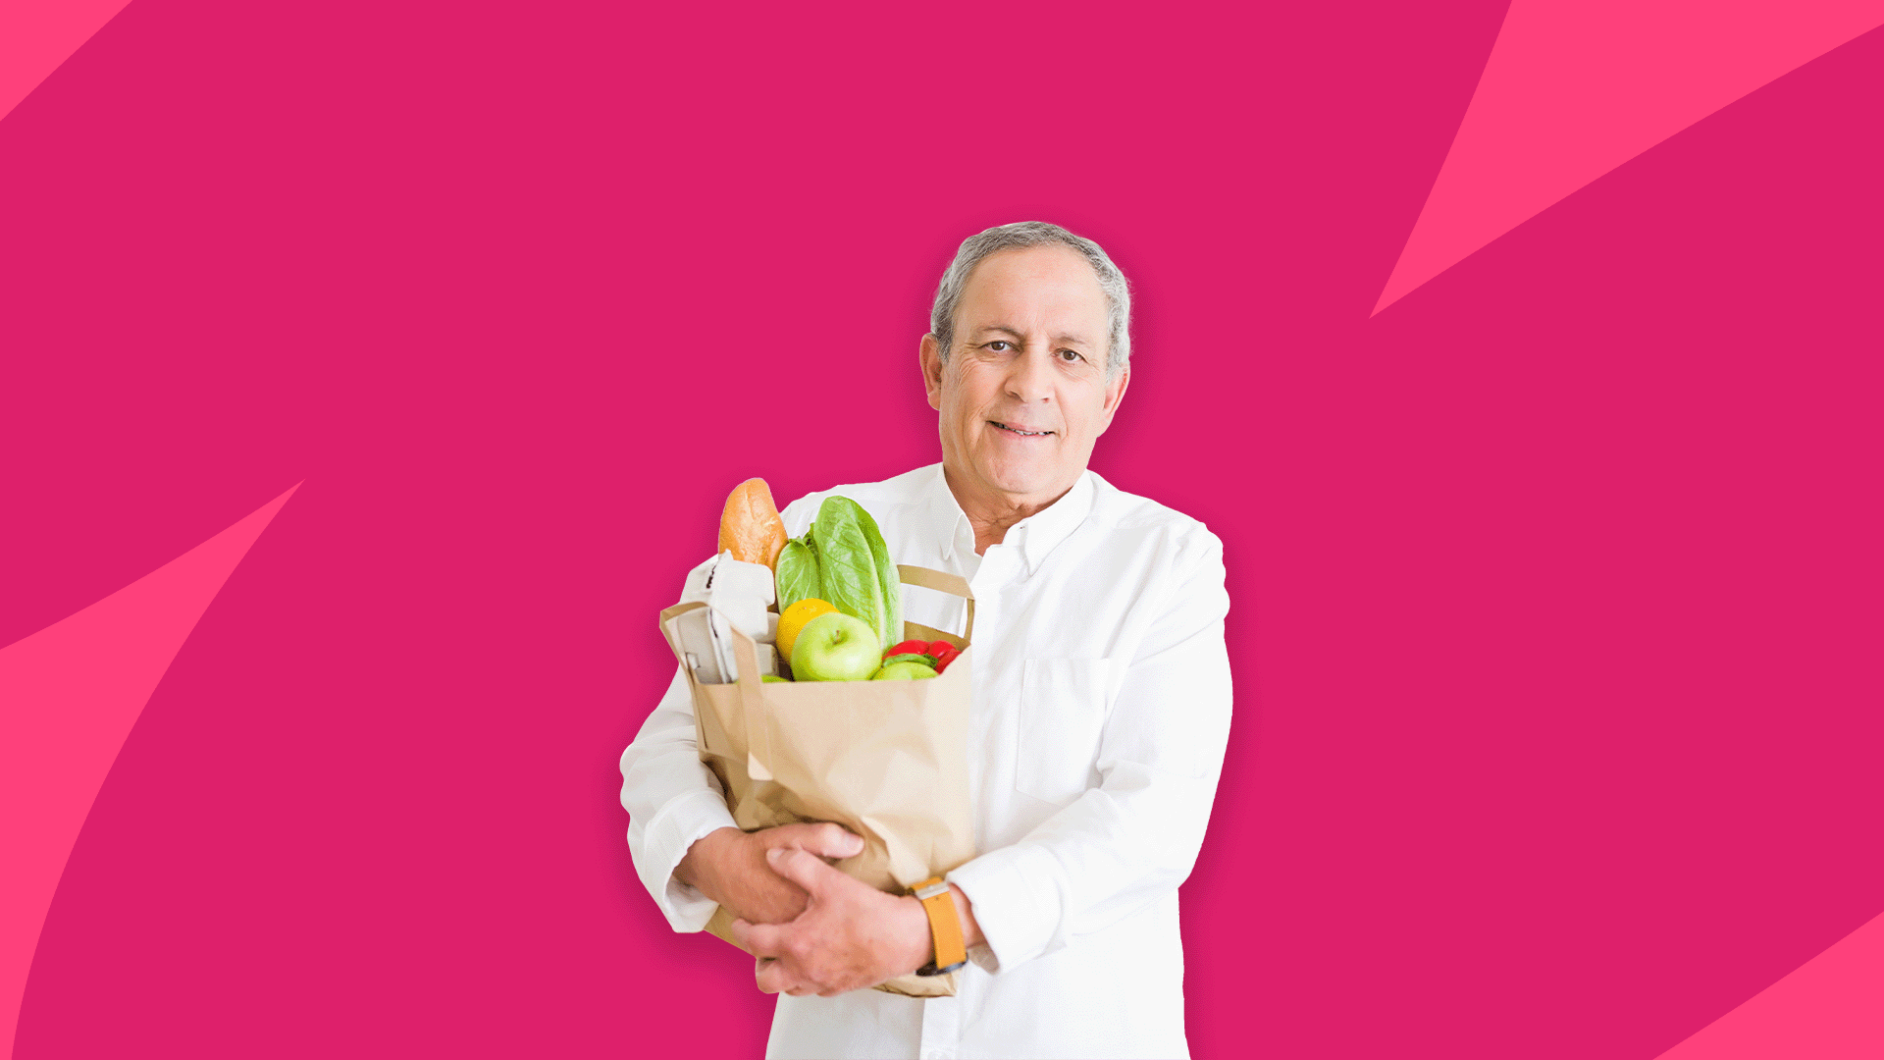 A healthcare provider carrying a grocery bag with various foods